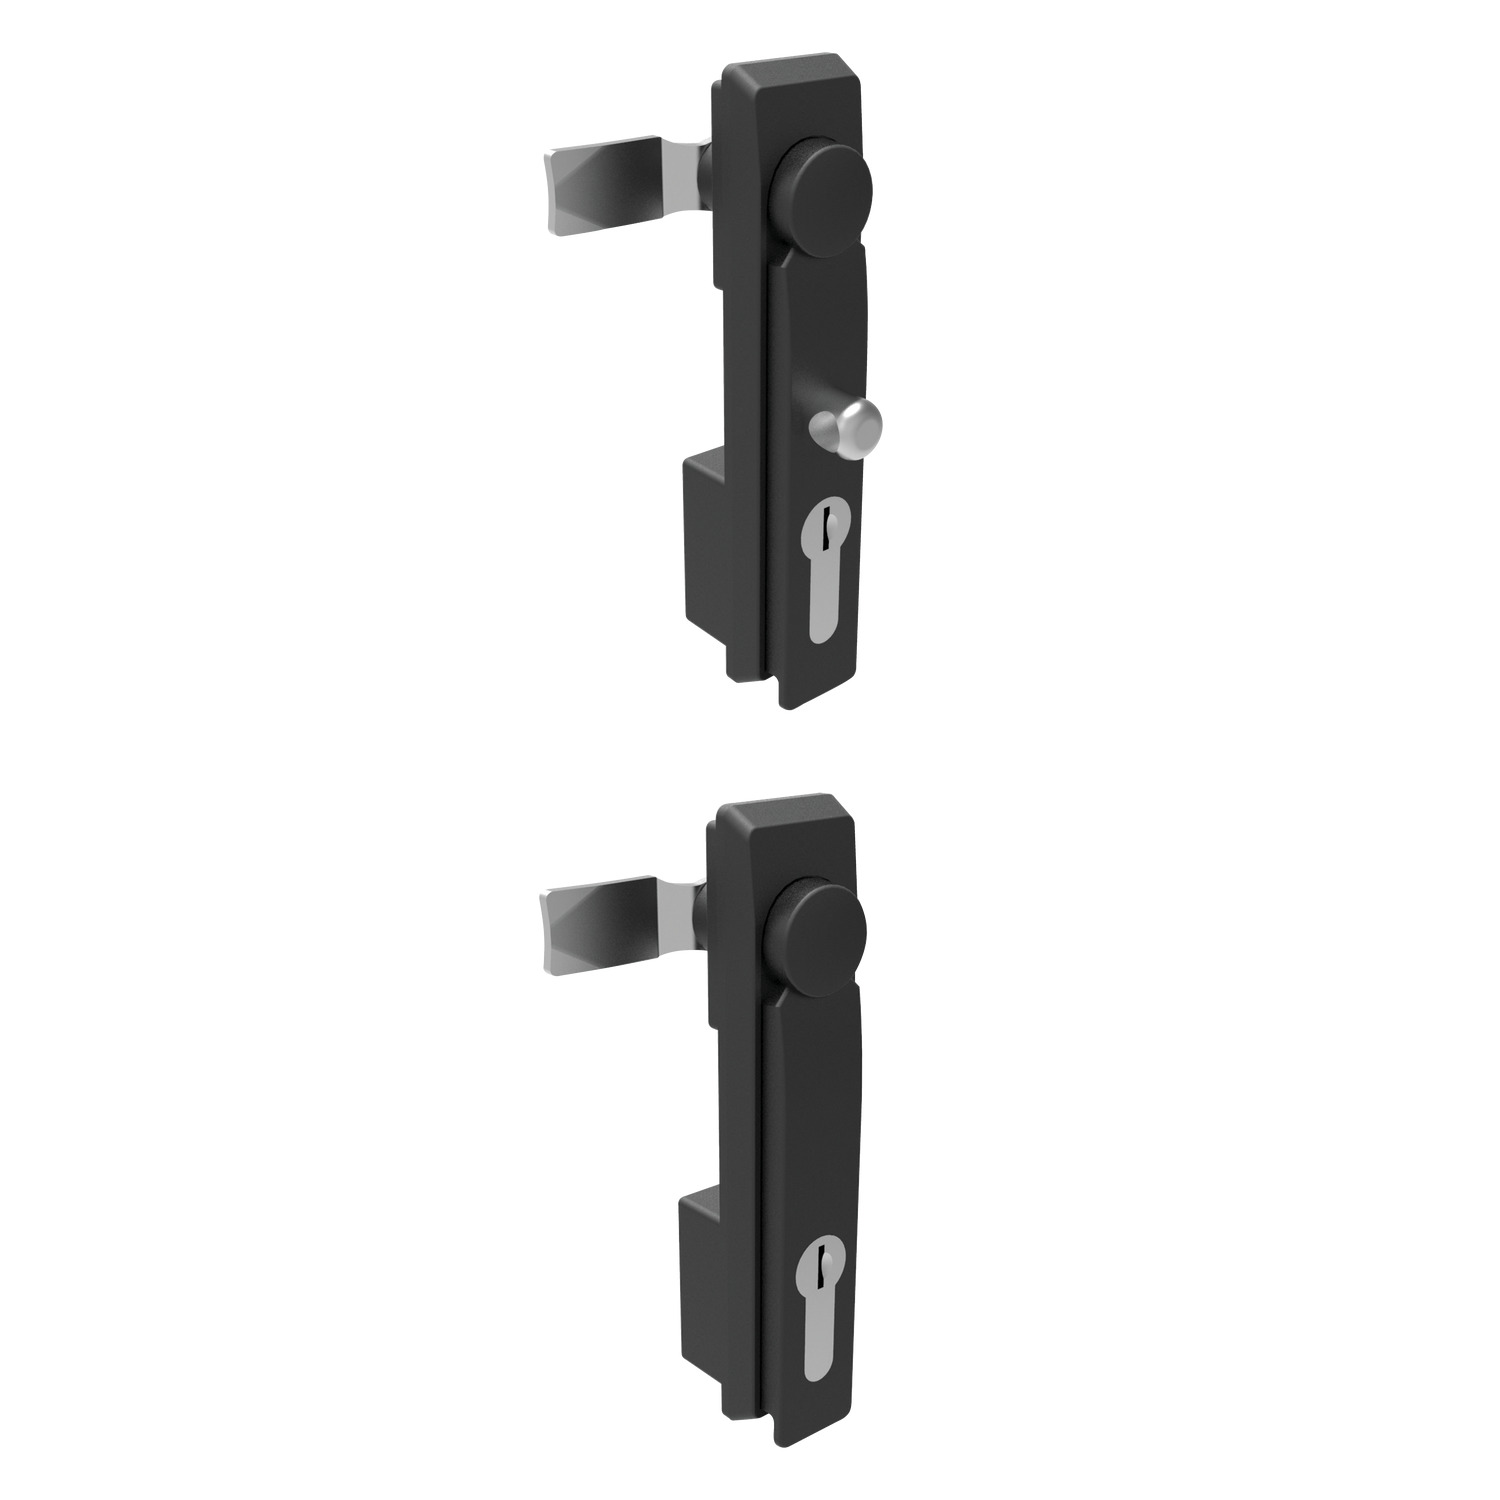 B1088.AW0010 Swing Handles Body and Handle Die Cast, black finish. 40 Euro Lock.